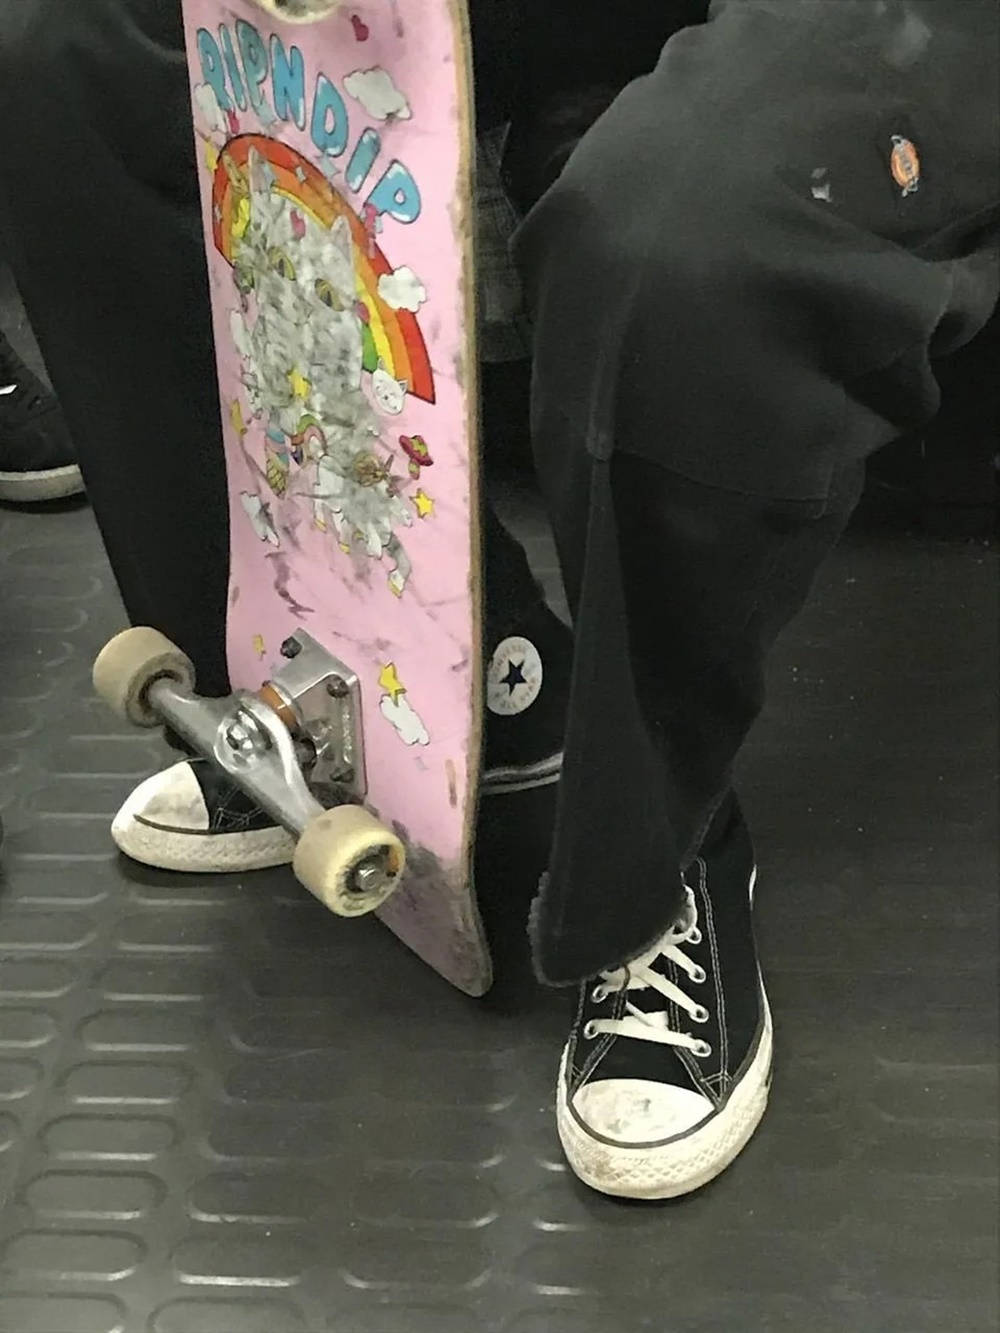 A person sitting down with a skateboard on their feet - Skate, skater